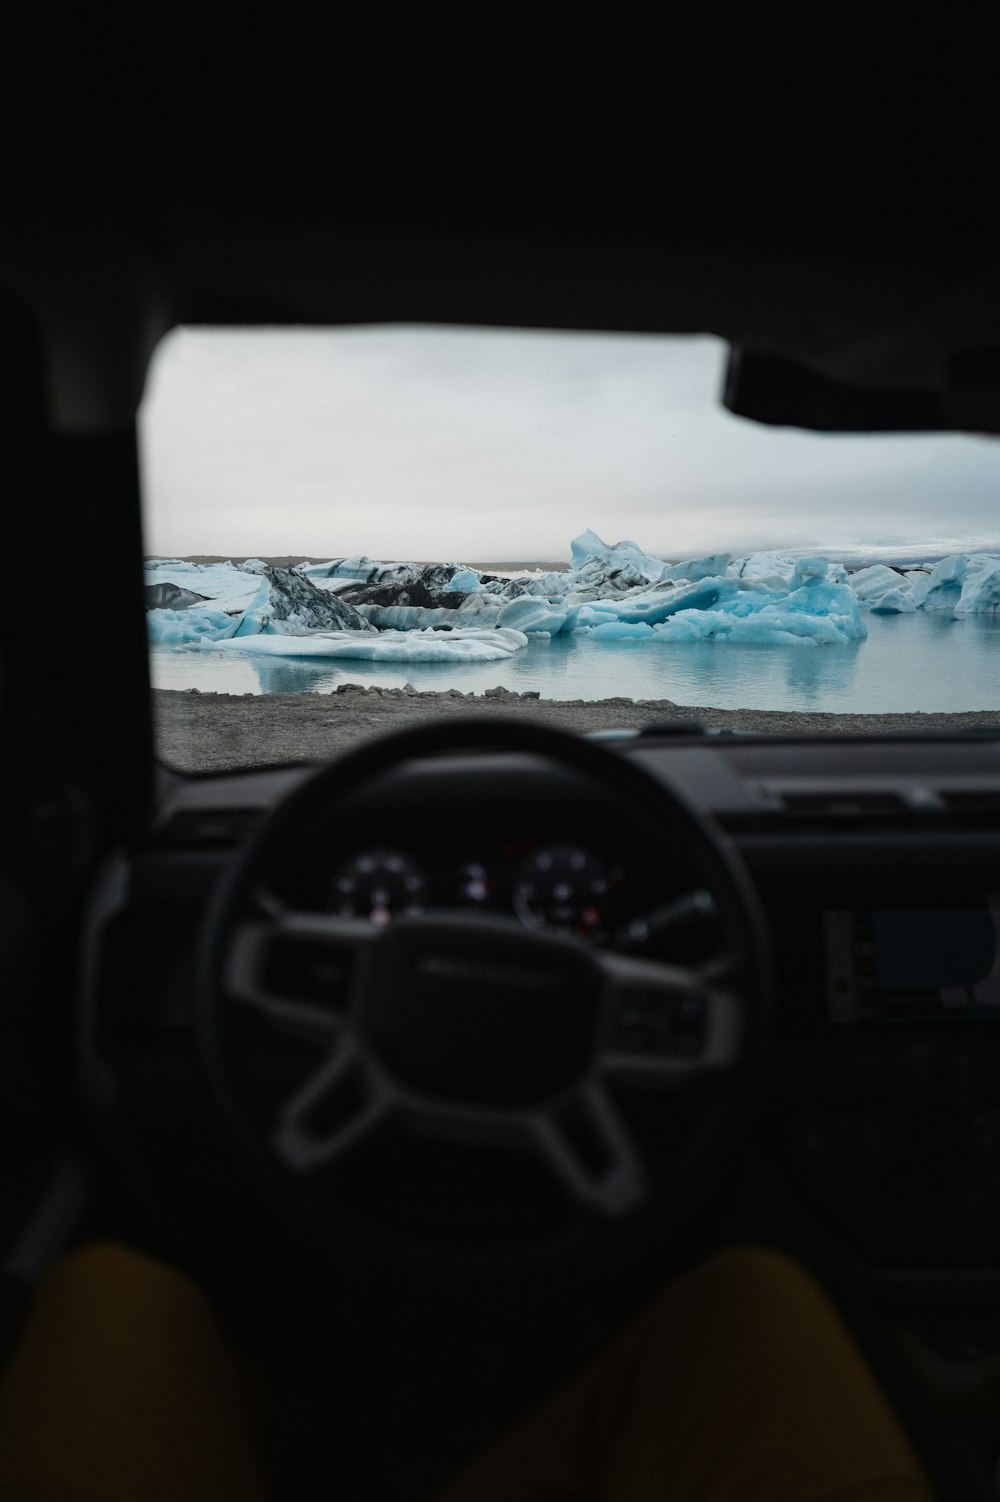 a view of a glacier from inside a car